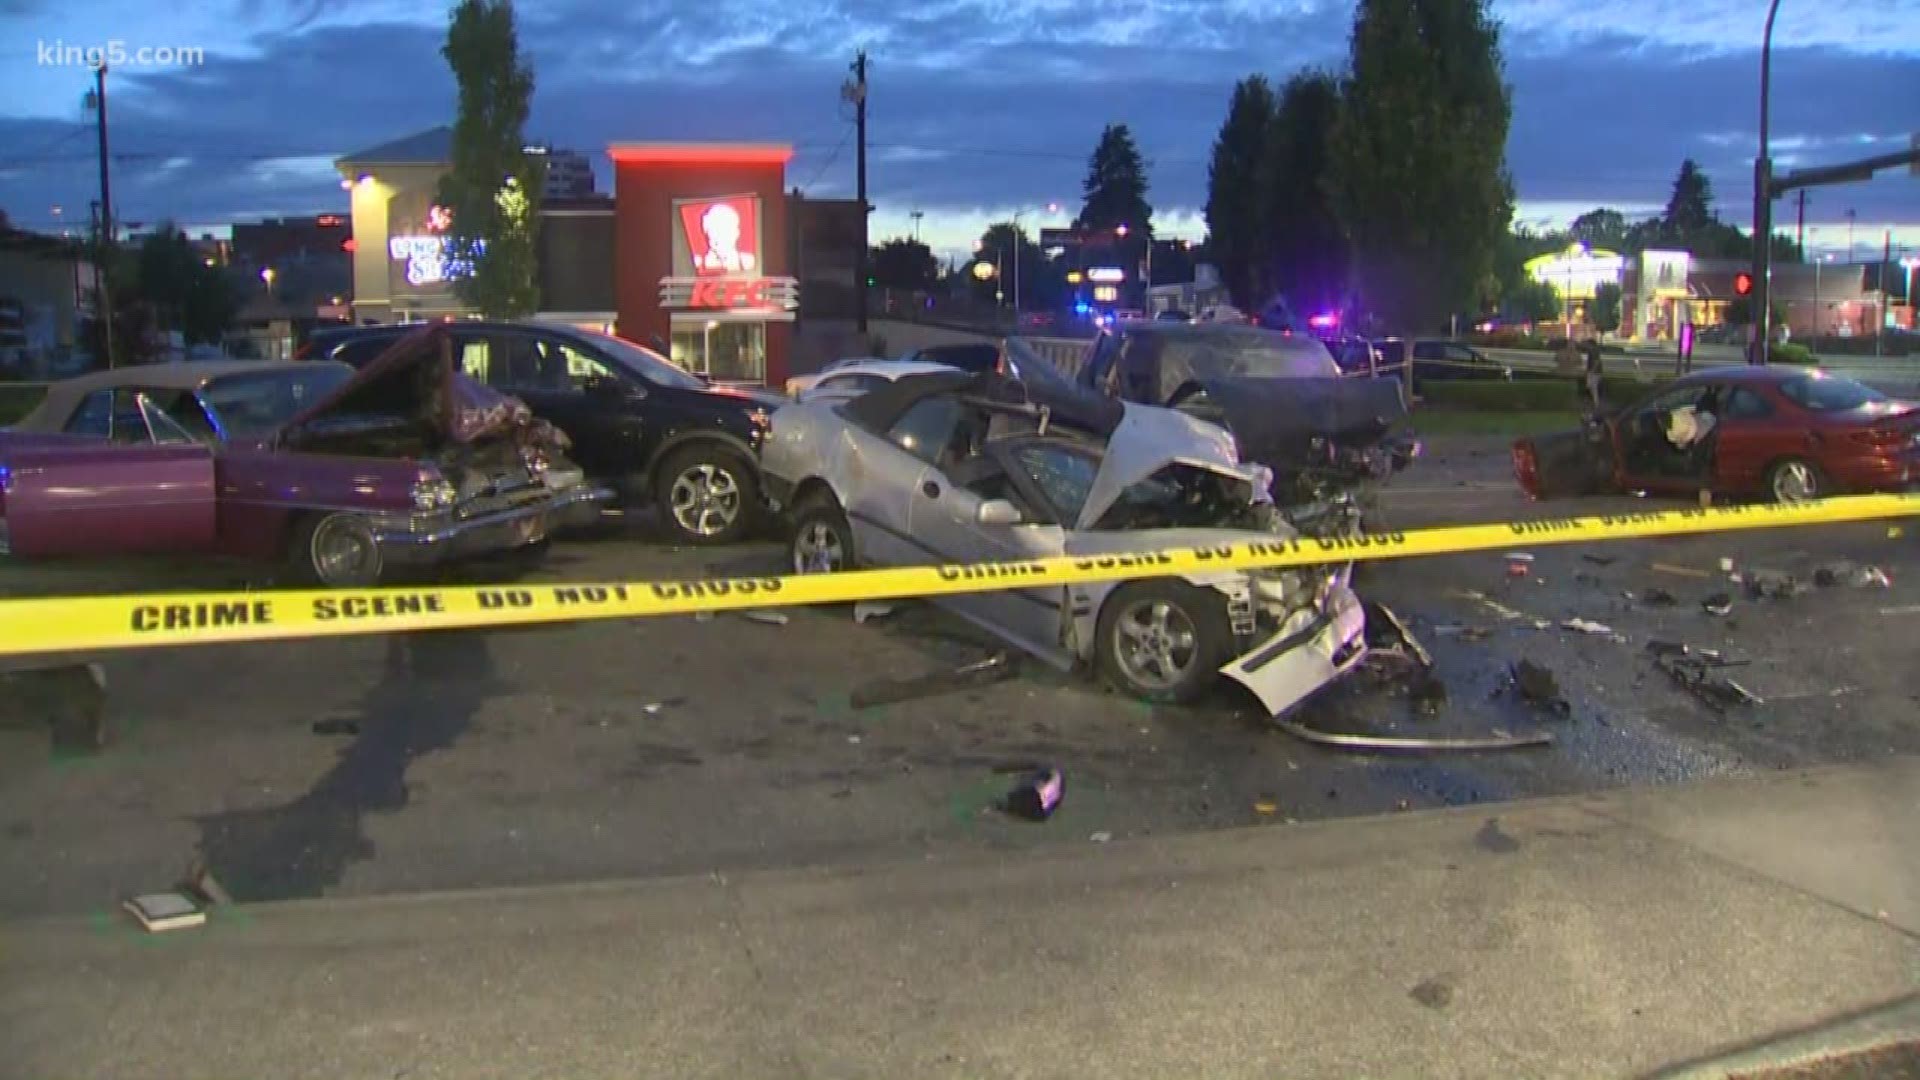 Six people were hurt in a fiery collision involving several cars in Everett. The road is closed on Broadway between 26th and California, and also on Everett Avenue between McDougall and Lombard.